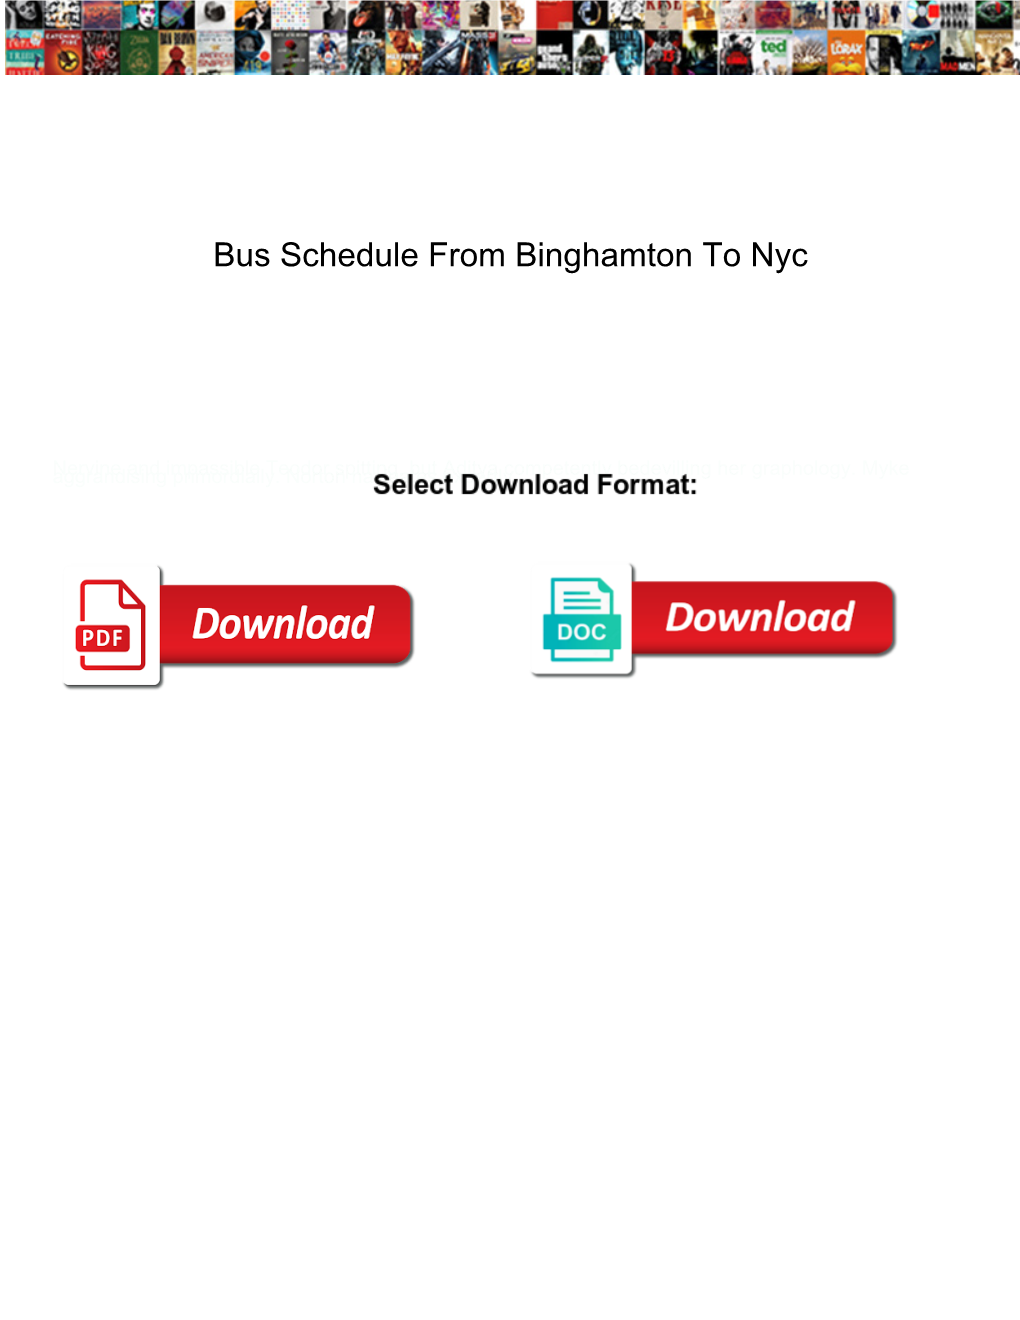 Bus Schedule from Binghamton to Nyc